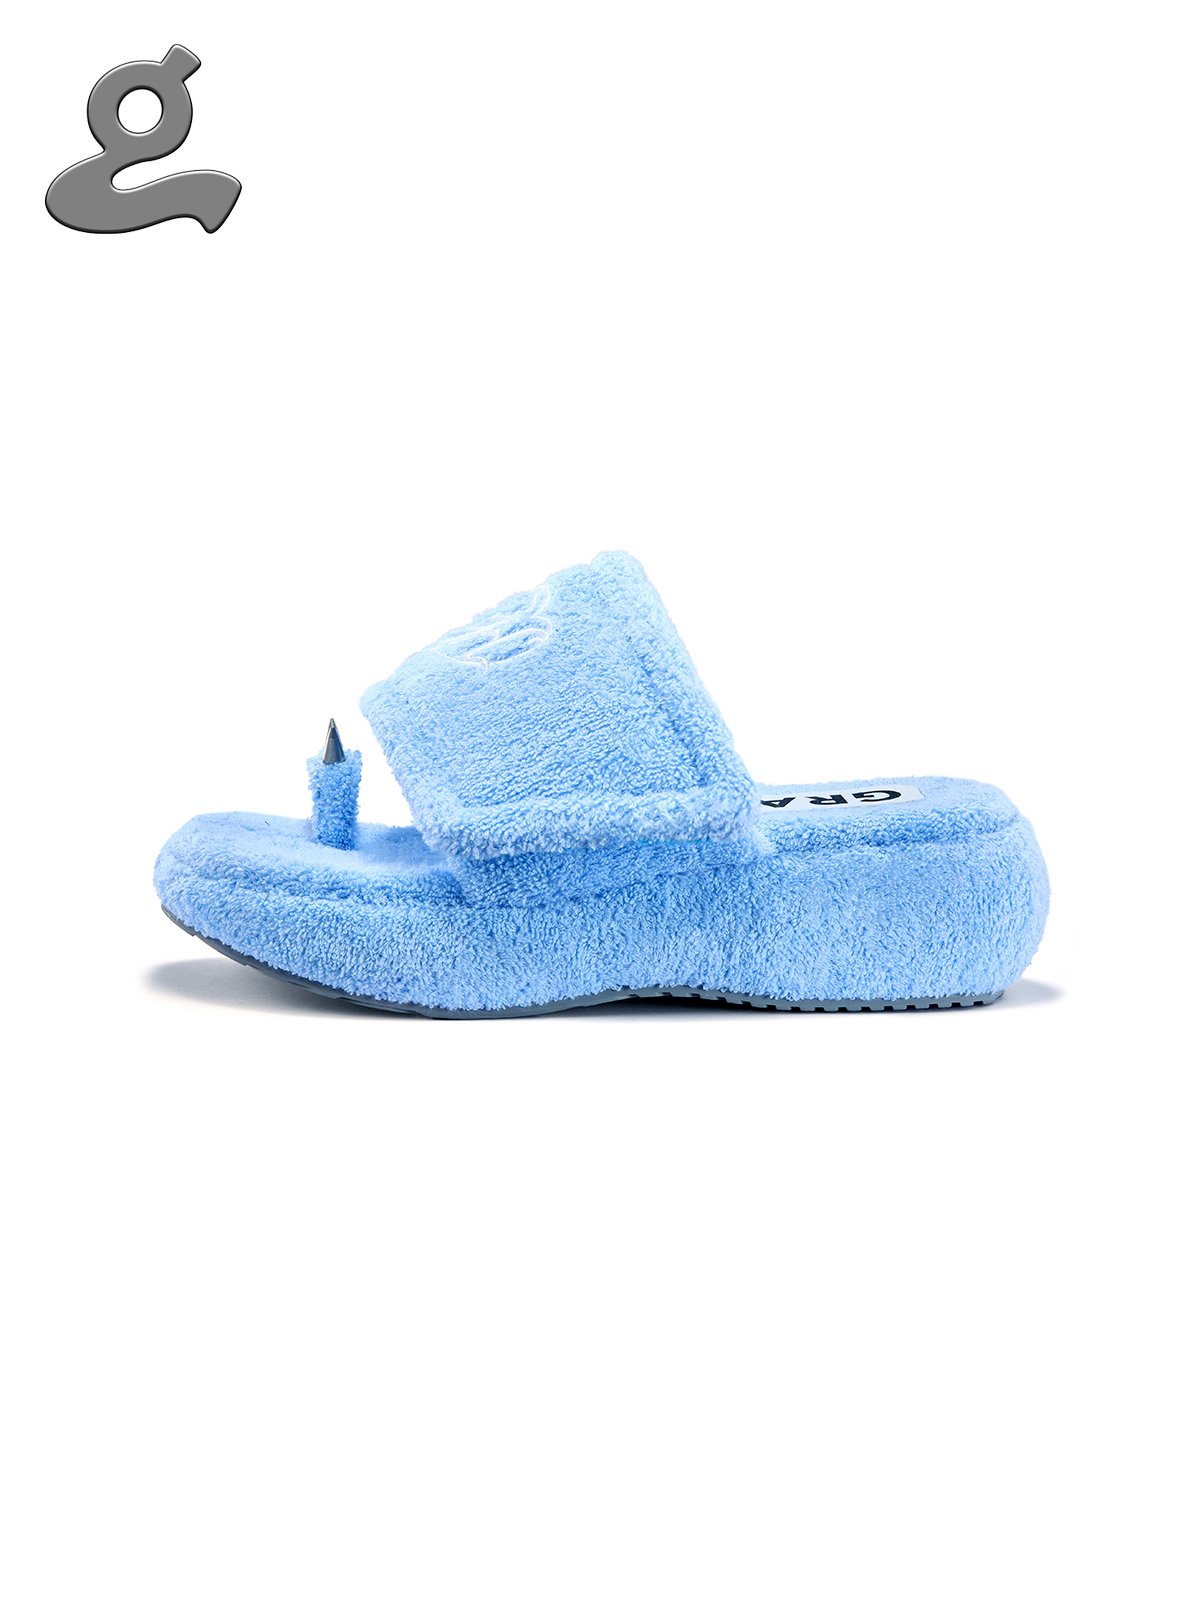 Image of [Pre-Order] Blue Embroidered Velcro Slippers